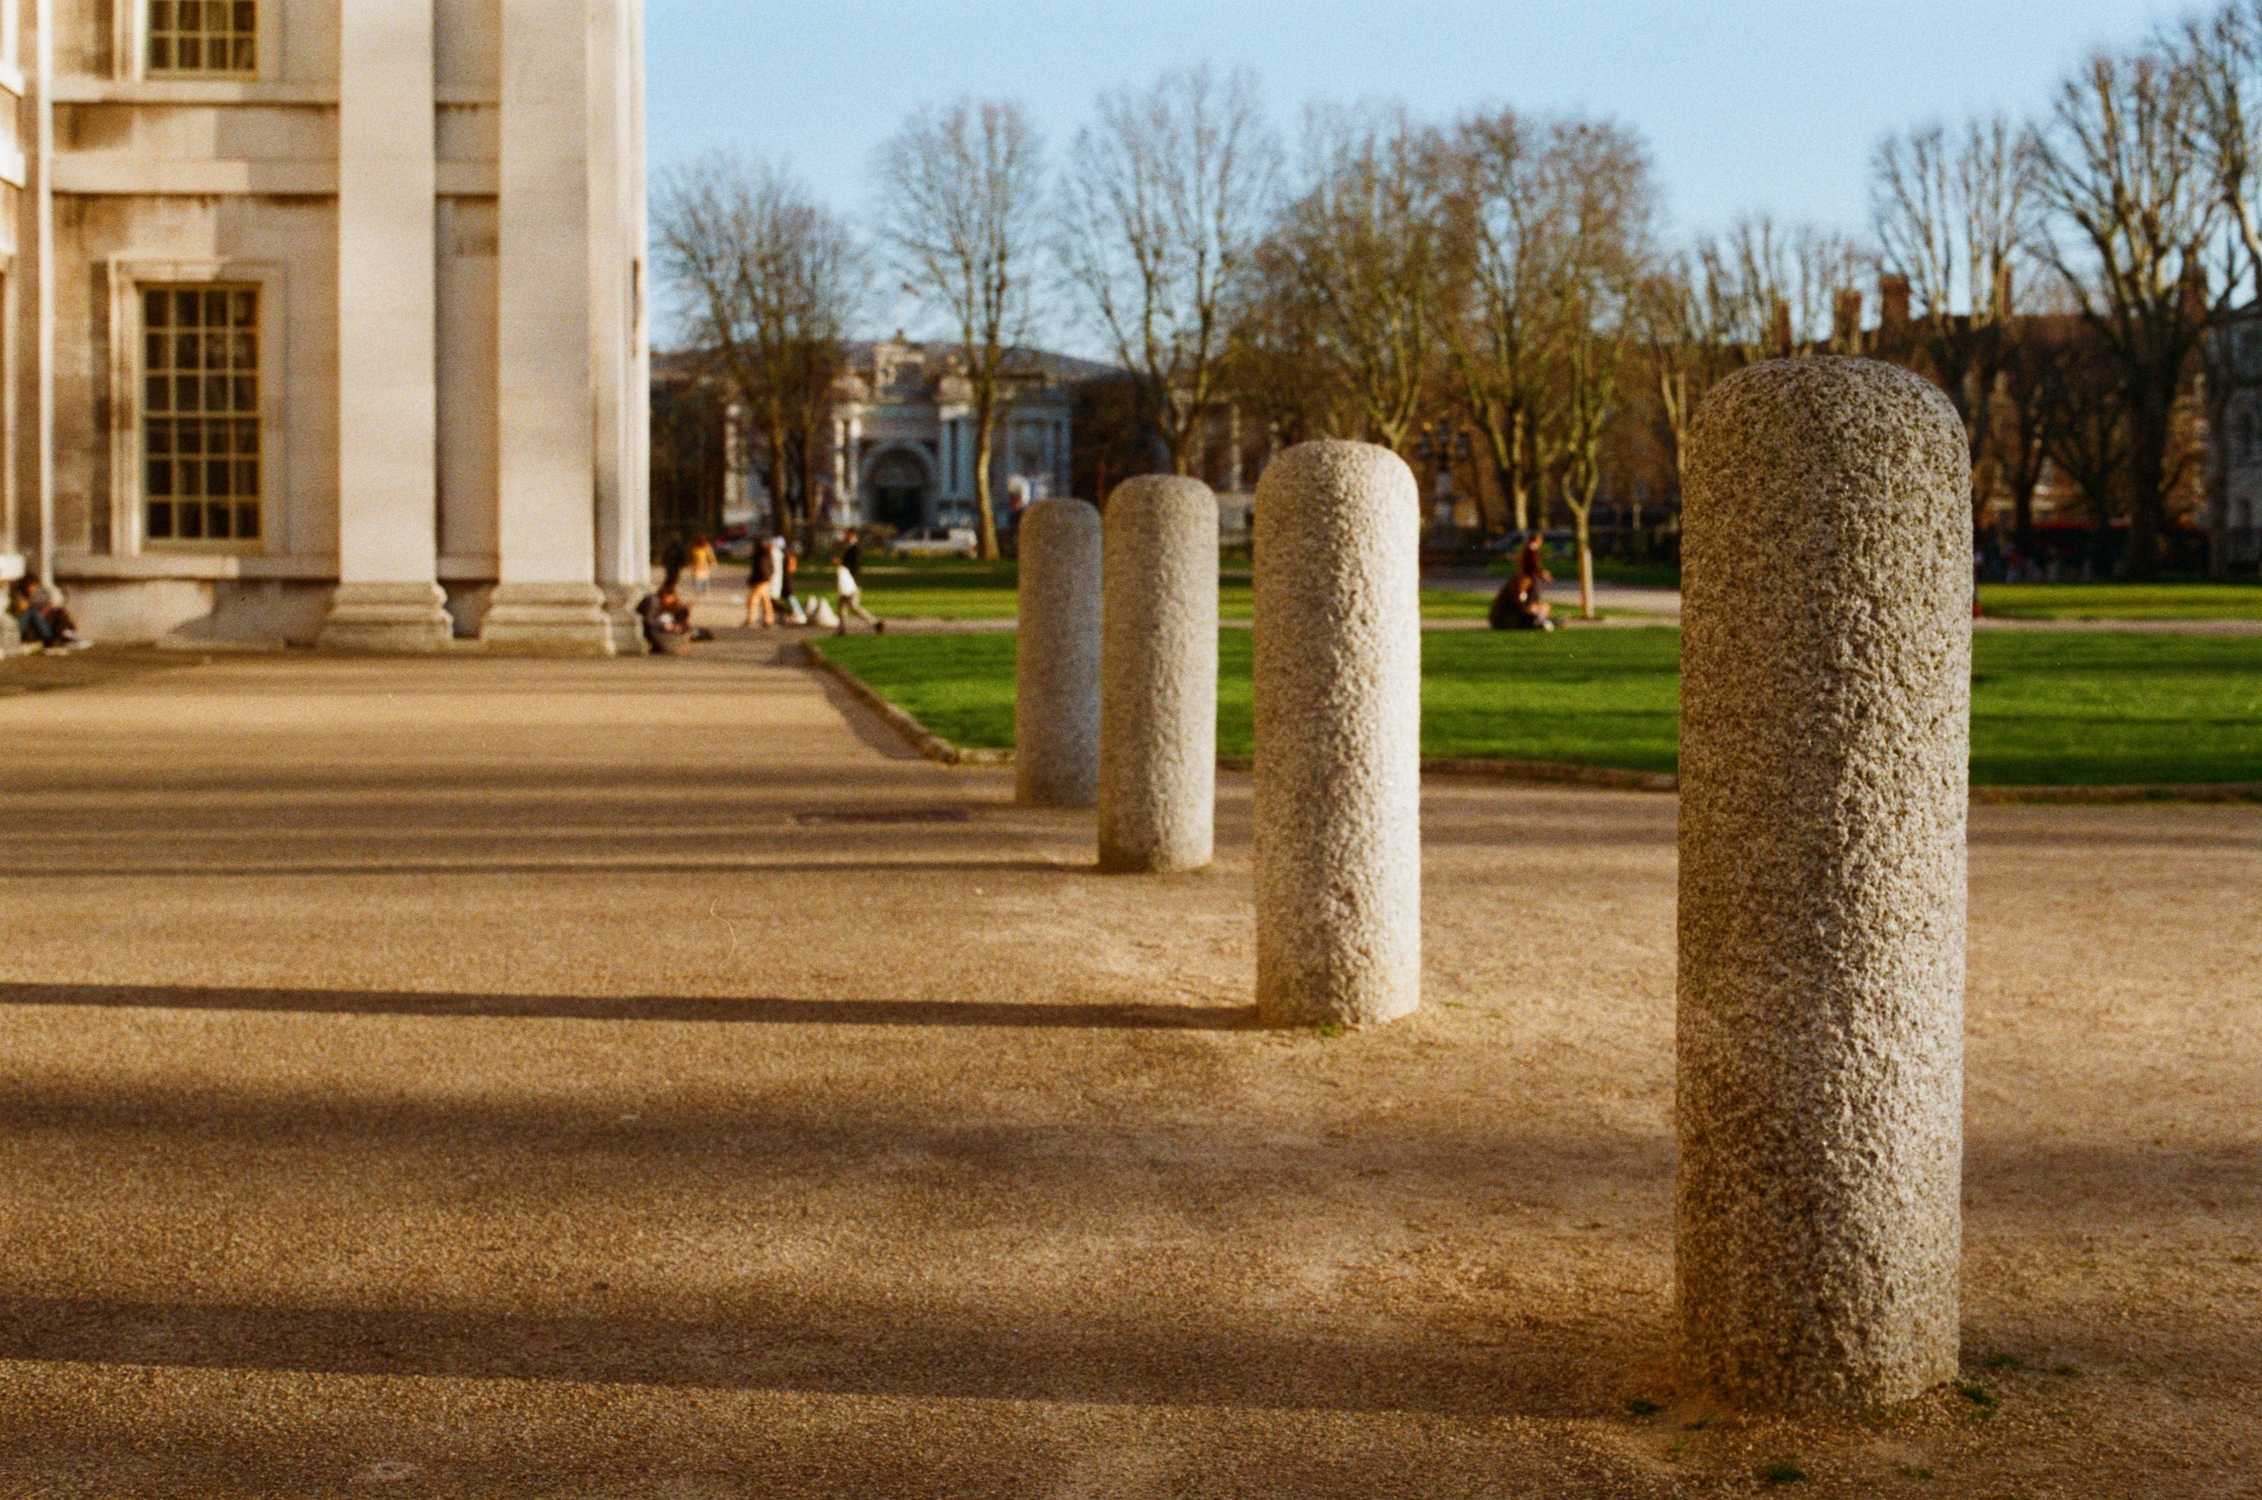 Stone bollards in afternoon light (pic: Stephen Dowling)